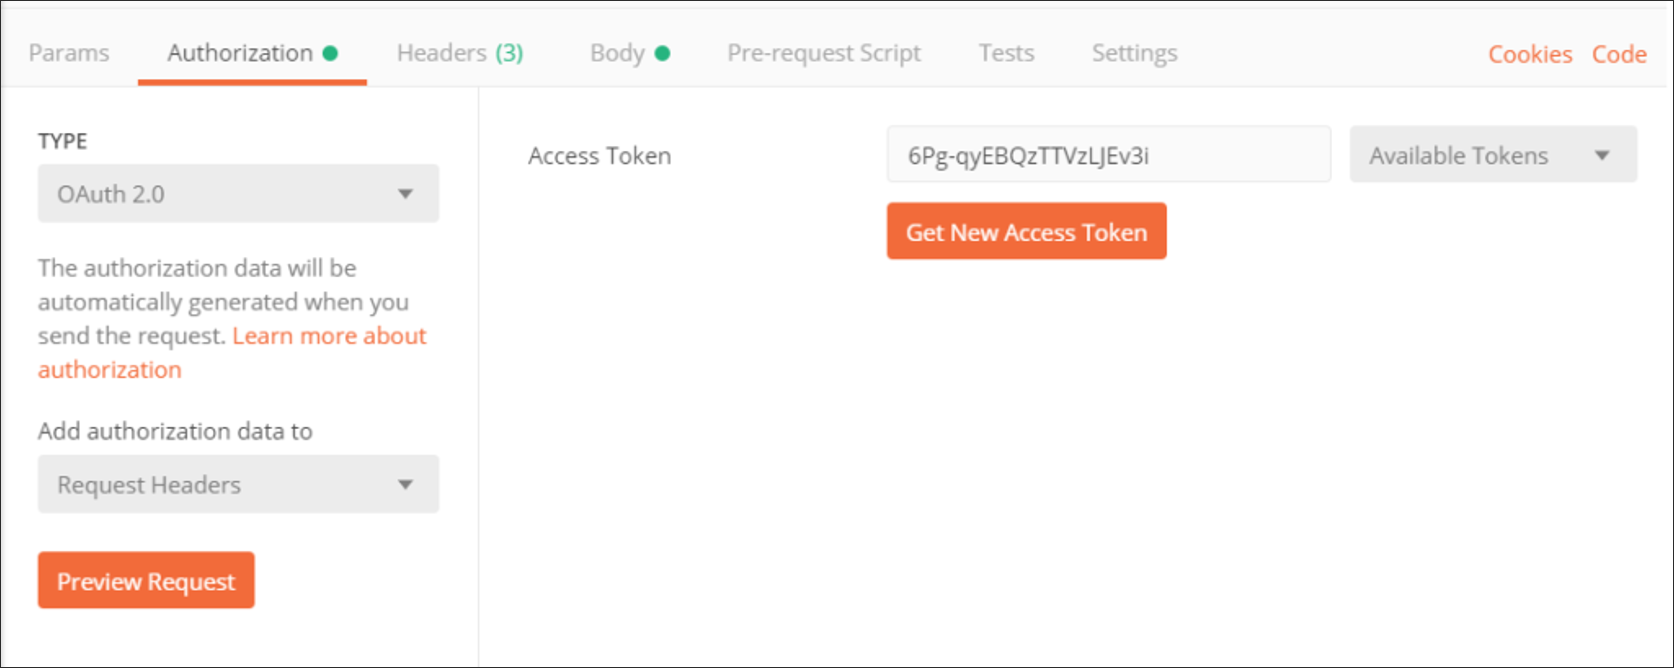 The Authorization tab in Postman